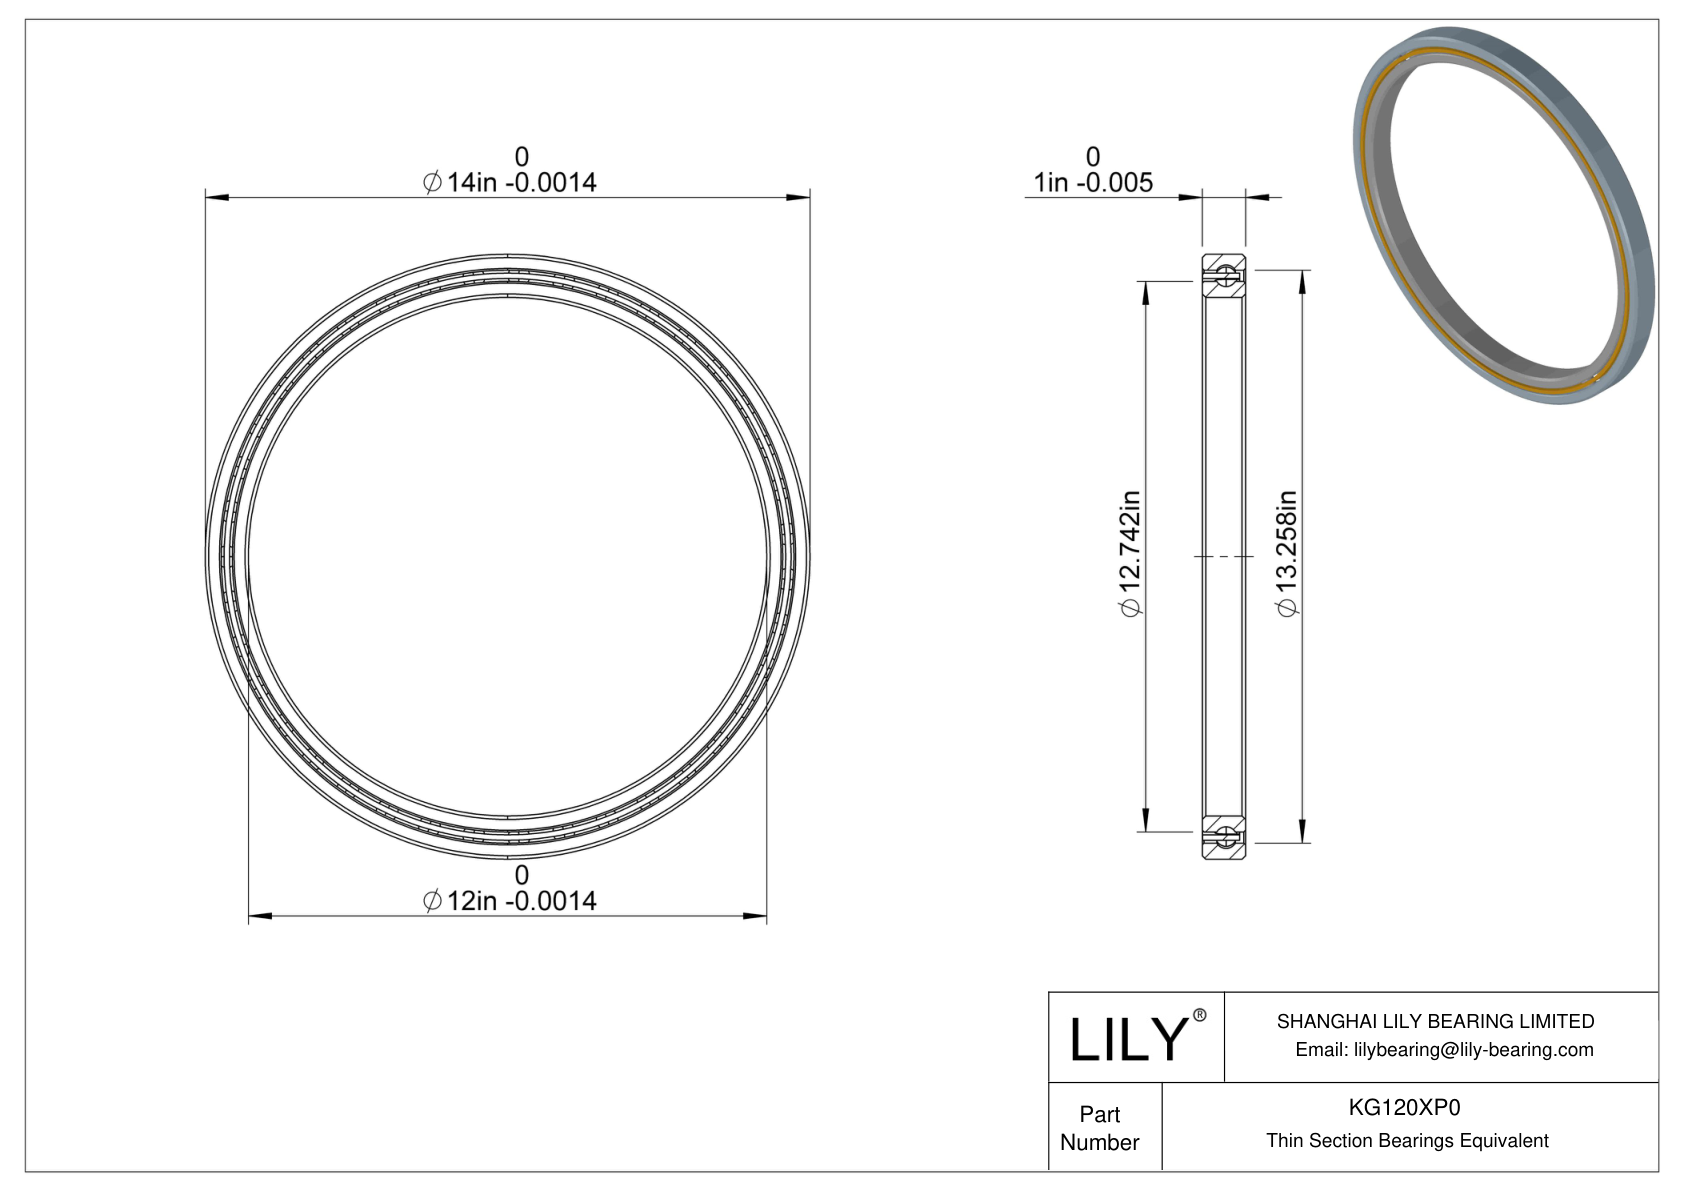 KG120XP0 Constant Section (CS) Bearings cad drawing